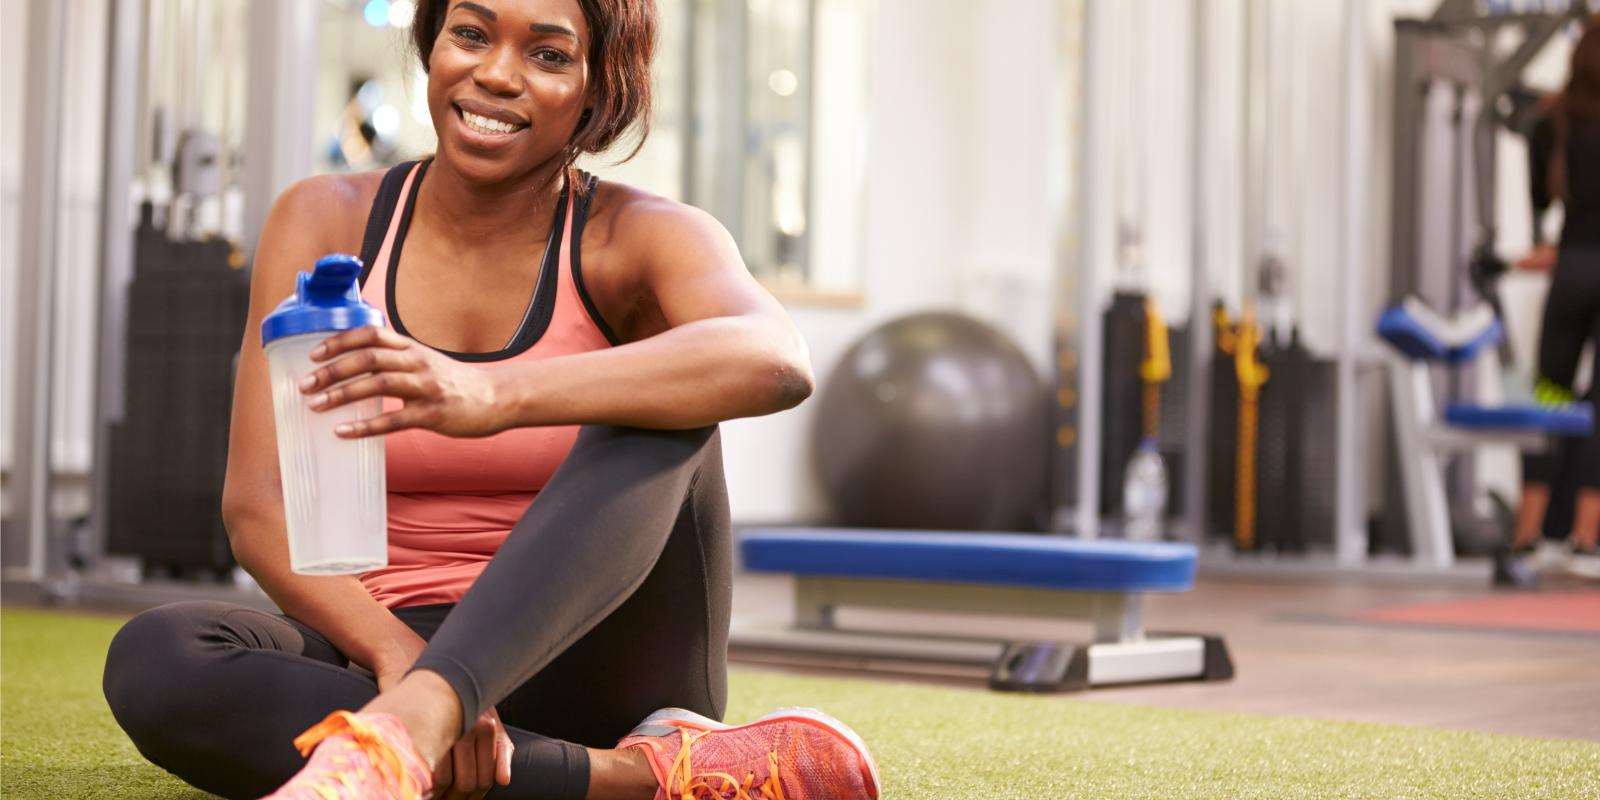 young black woman at gym shutterstock 296915492  1